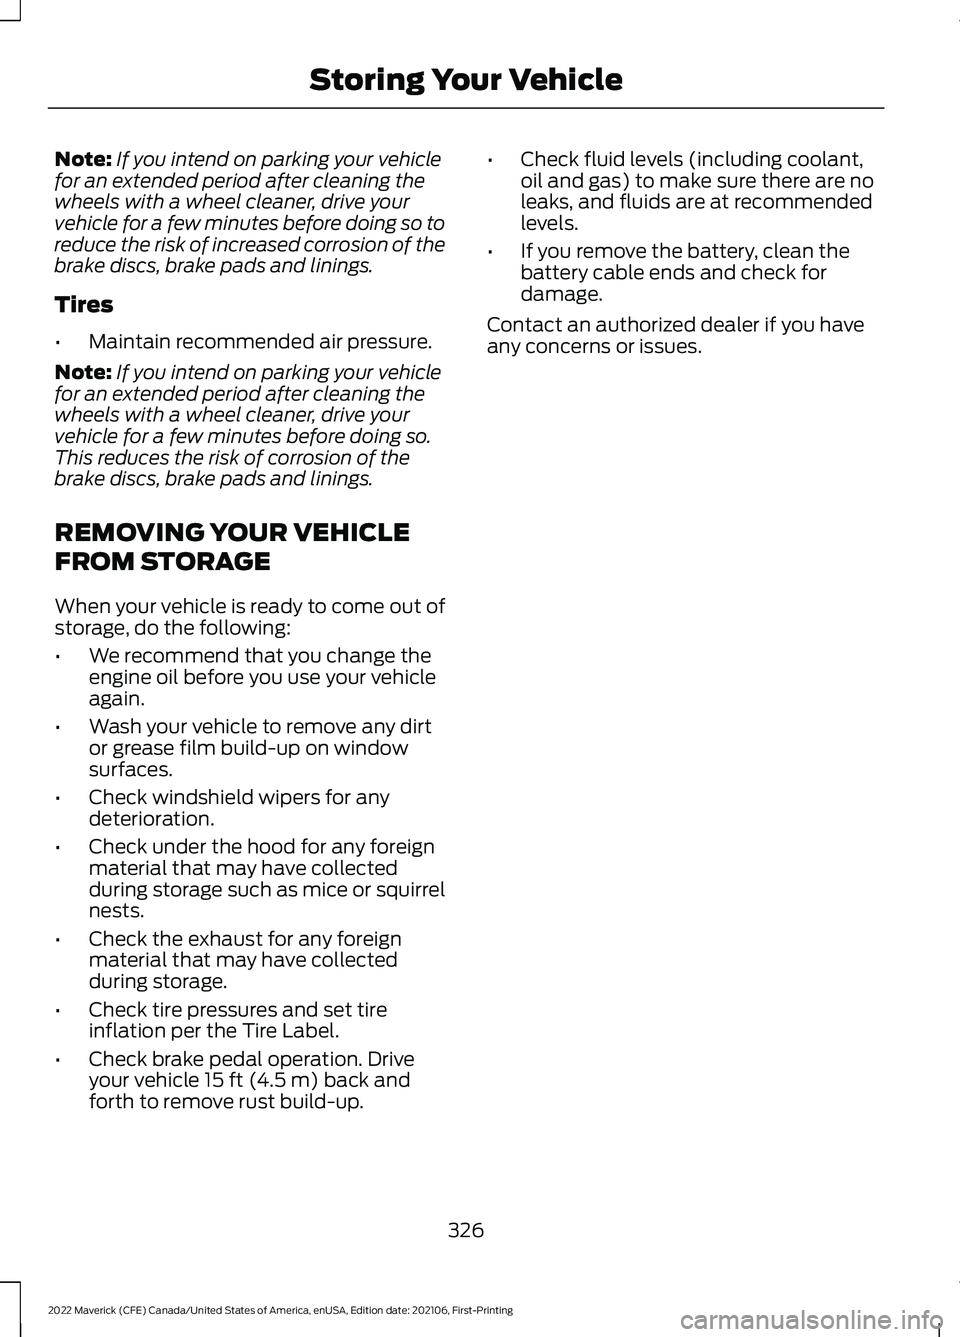 FORD MAVERICK 2022 Owners Guide Note:
If you intend on parking your vehicle
for an extended period after cleaning the
wheels with a wheel cleaner, drive your
vehicle for a few minutes before doing so to
reduce the risk of increased 